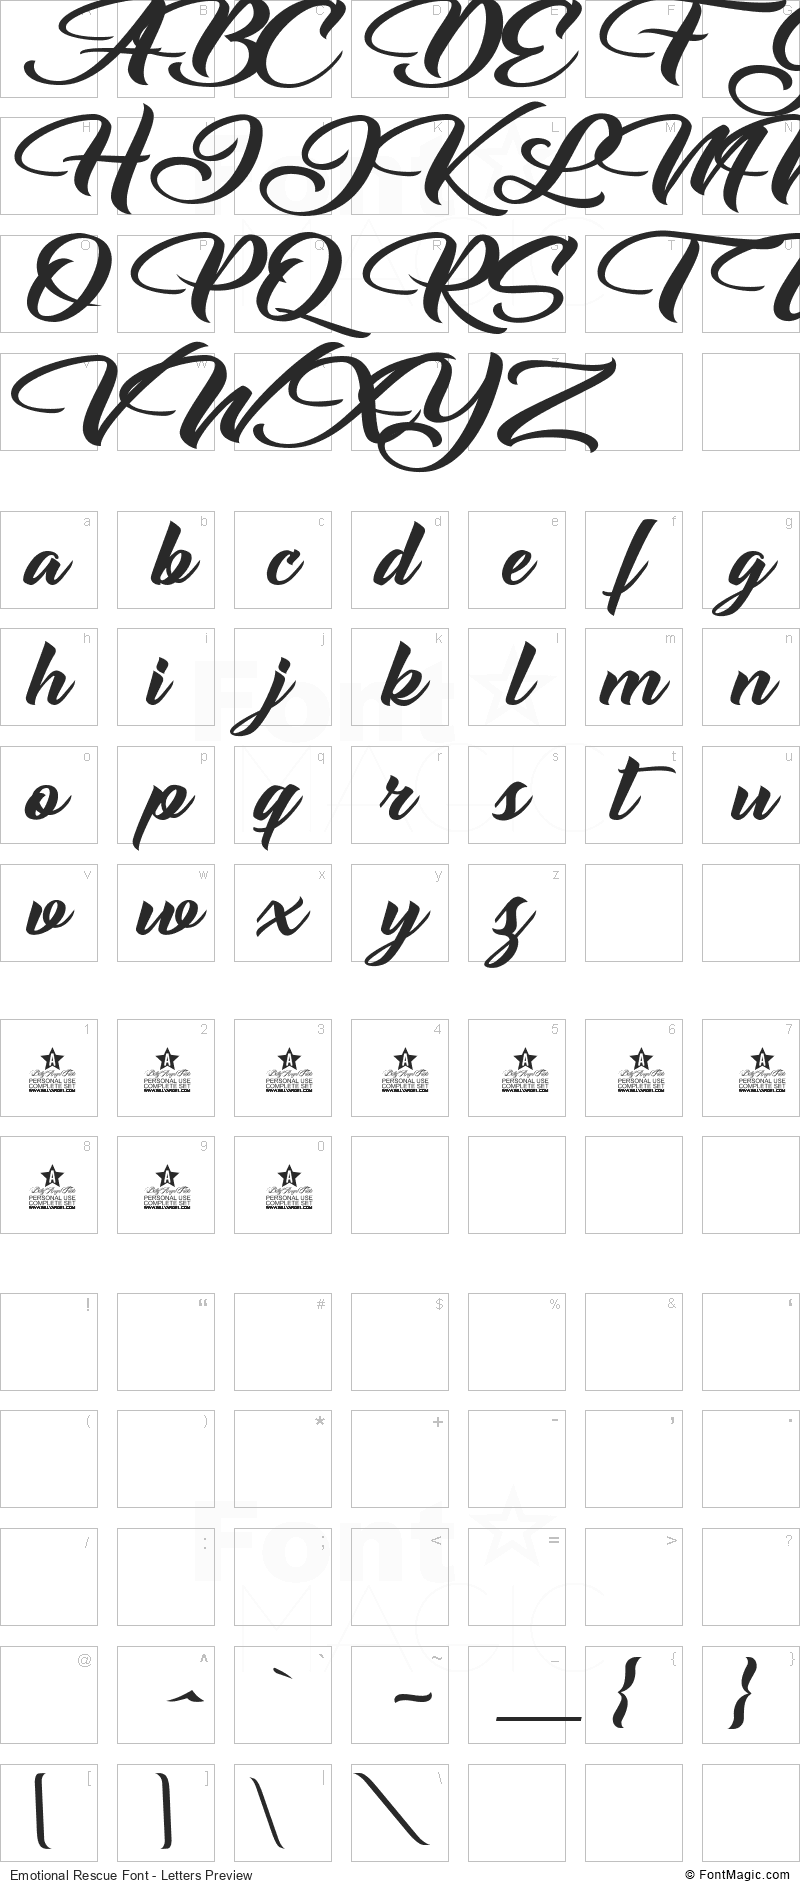 Emotional Rescue Font - All Latters Preview Chart